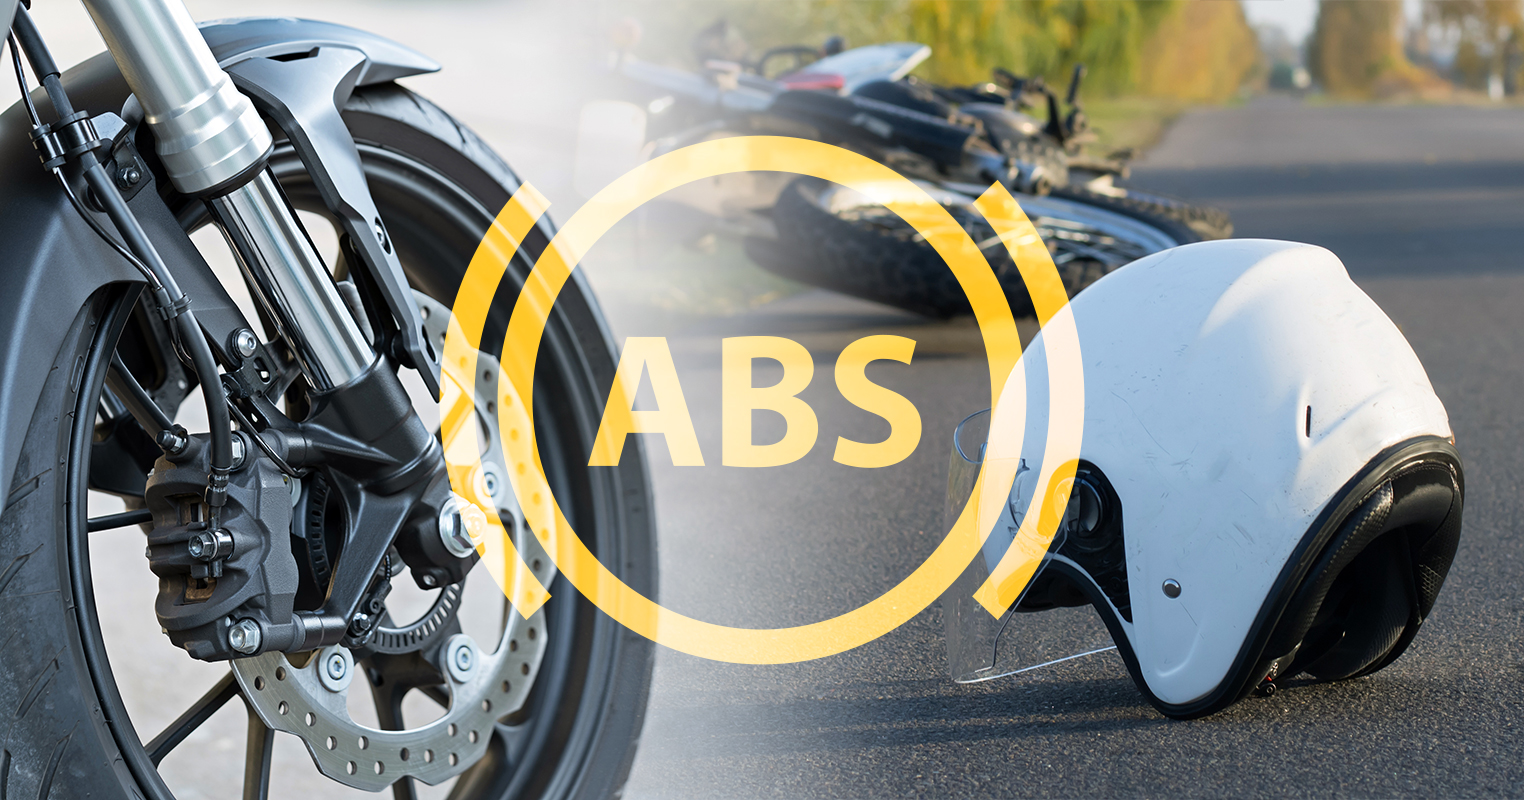 Study: Anti-Lock Brakes (ABS) May Decrease Risk of Motorcycle Crashes by 20-30%